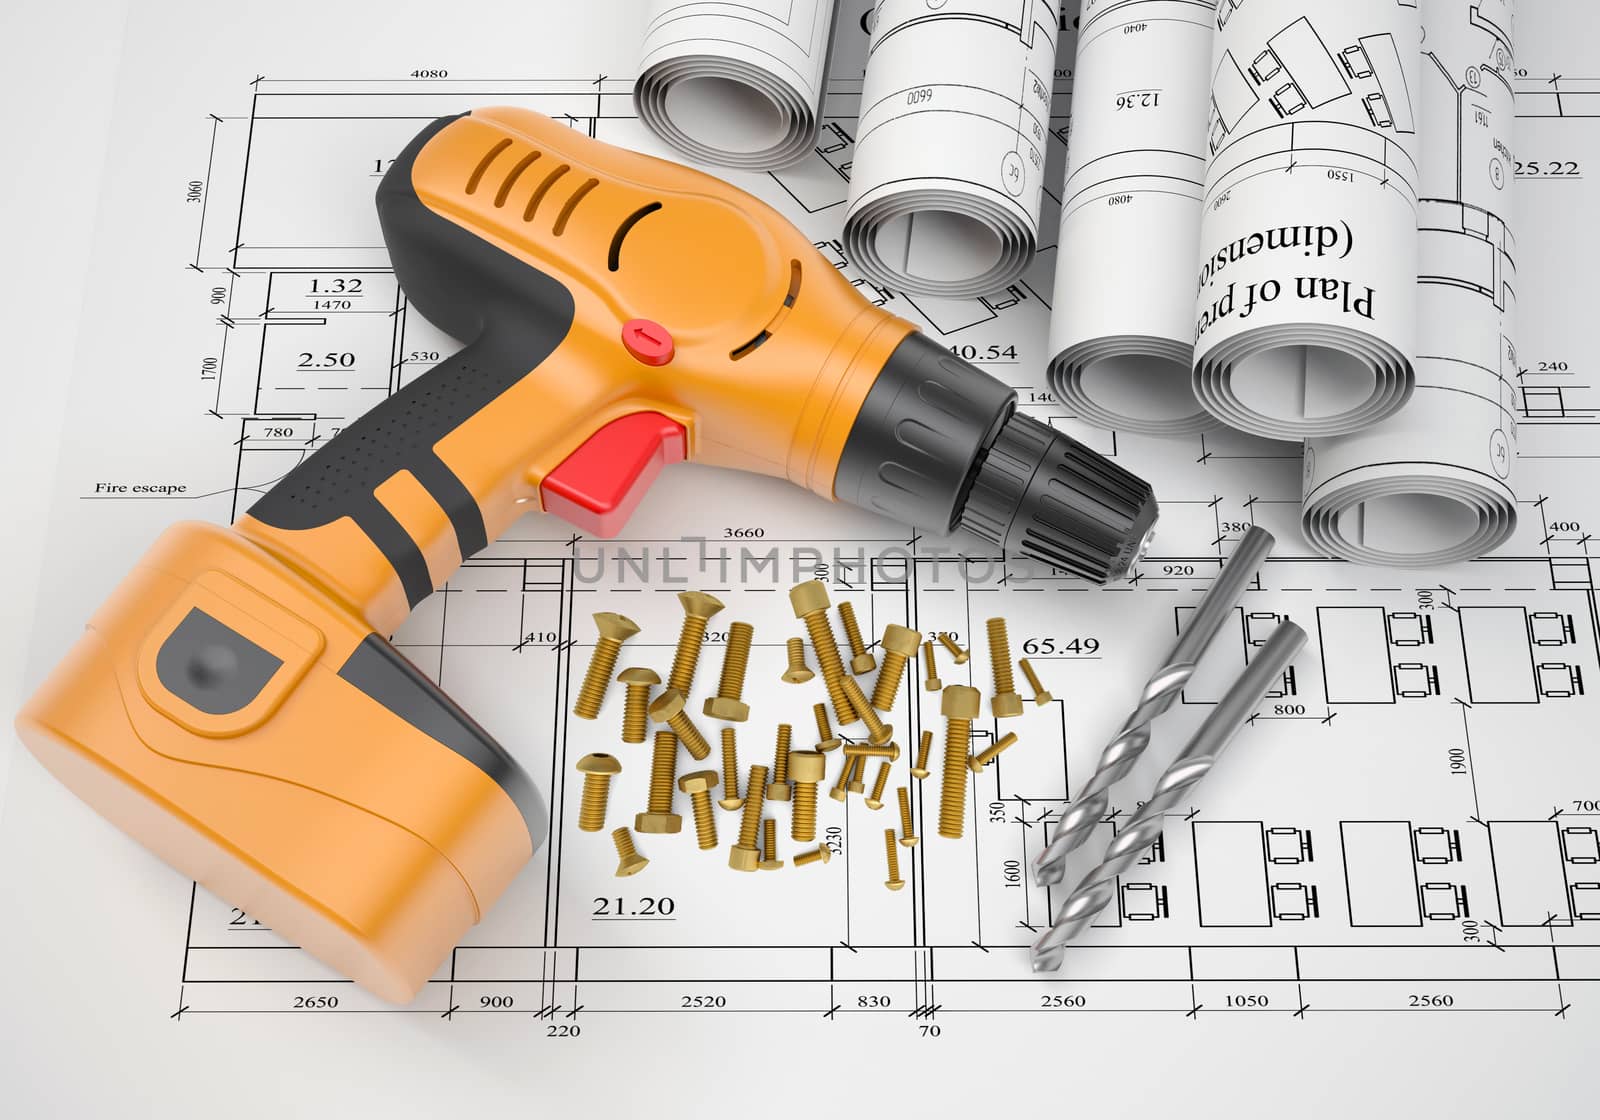 Electric screwdriver, fastening hardware, borers and scrolled drafts on spread architectural drawing.  Construction business concept.